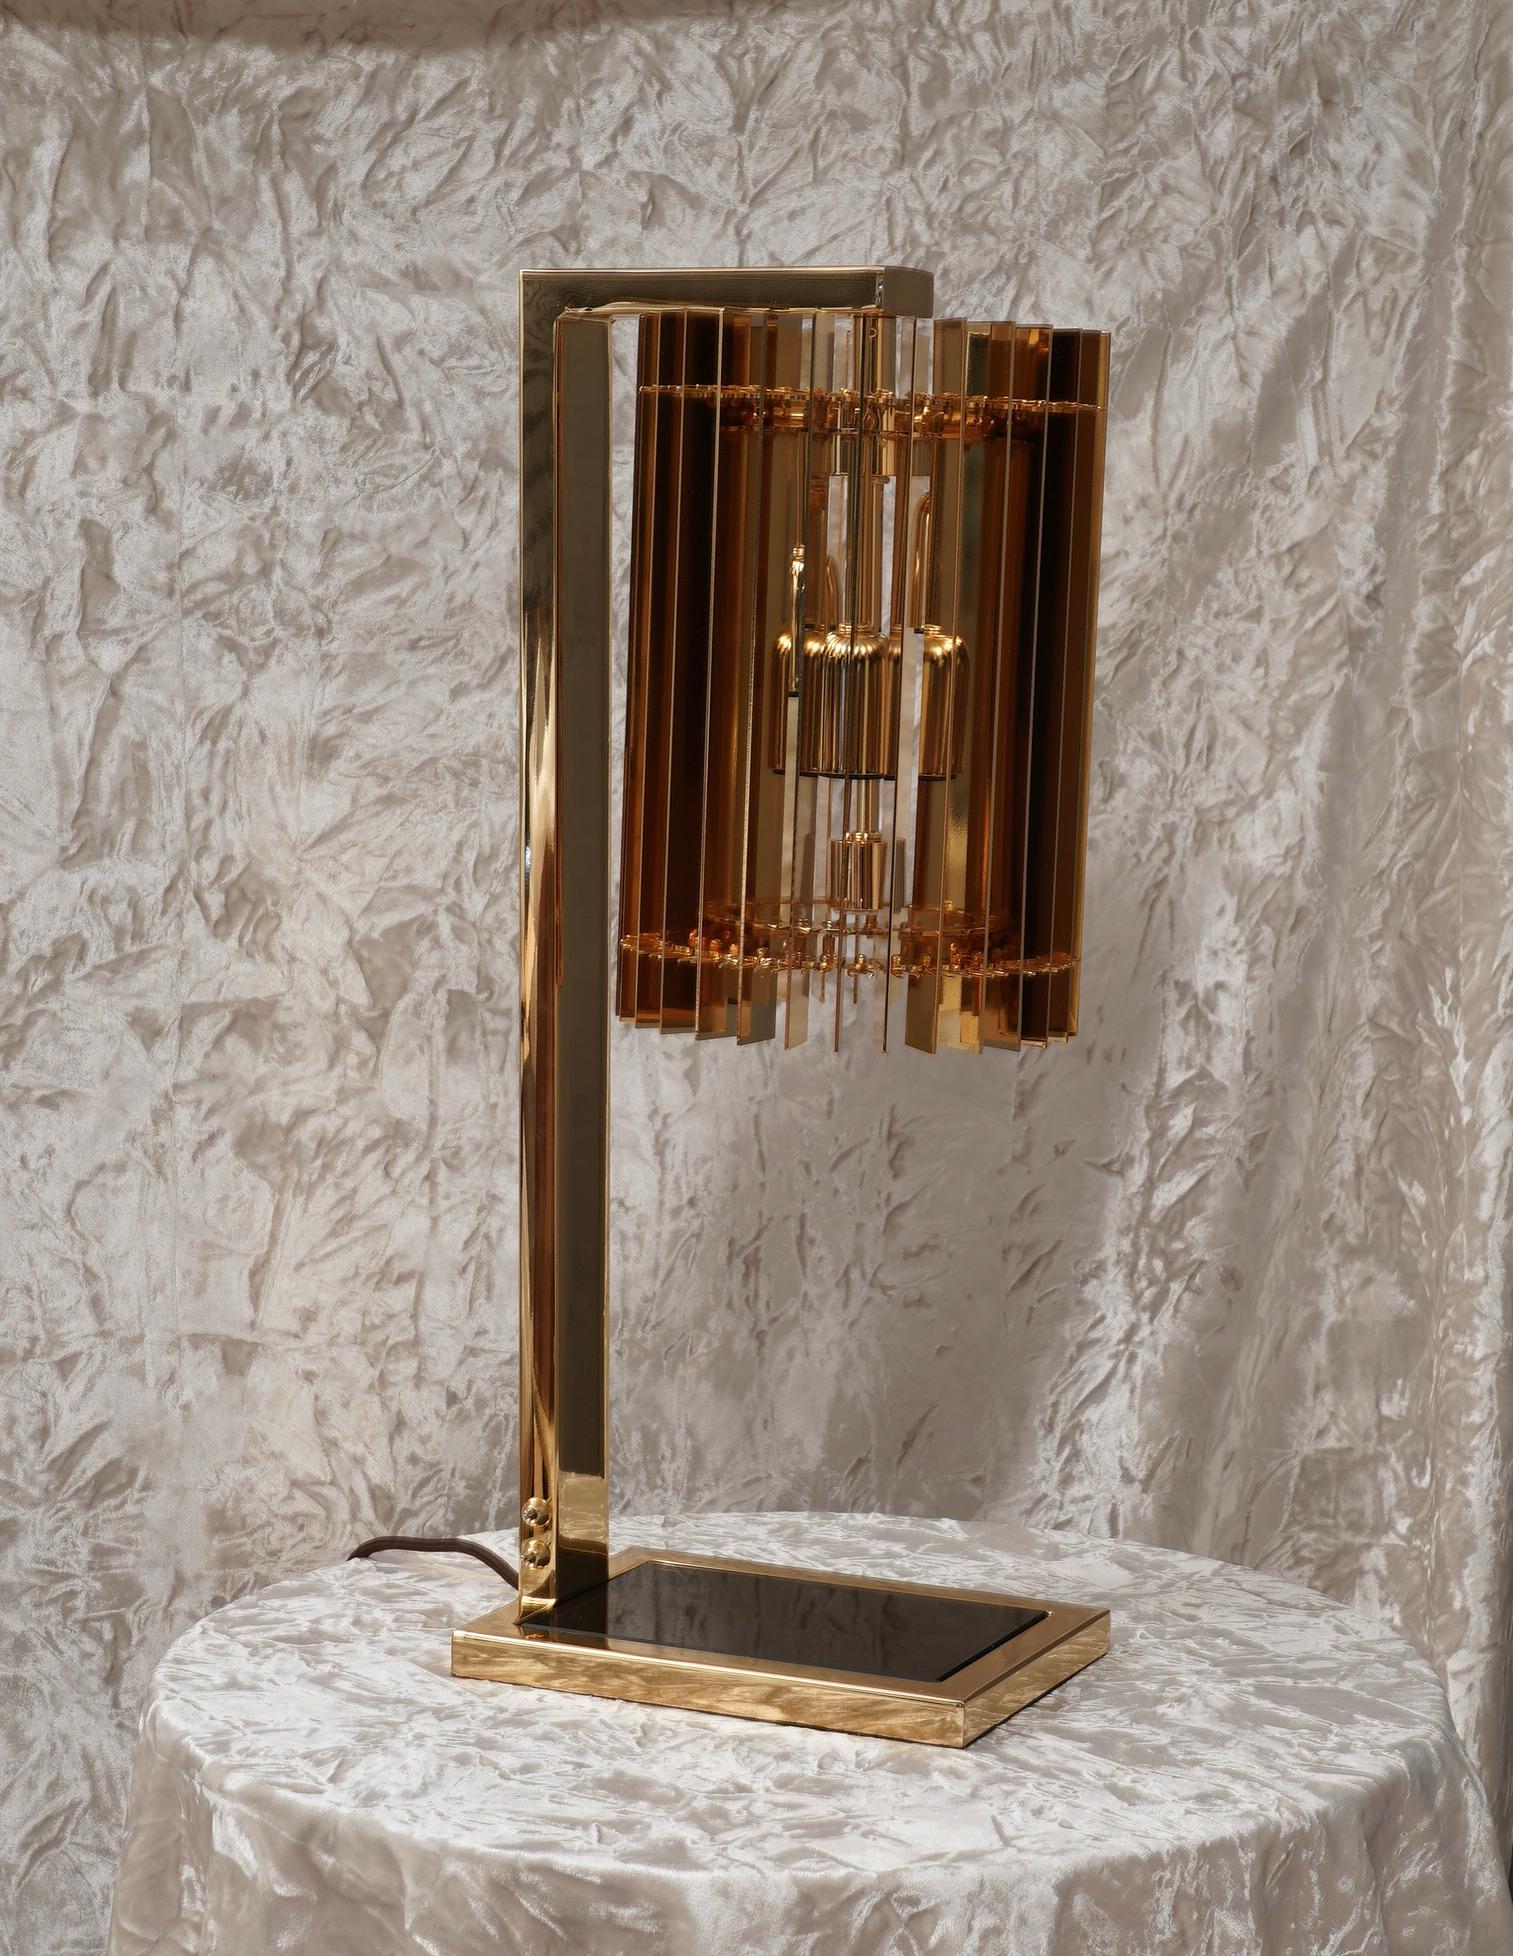 Elegant and stylish table lamp, rich and original design as in the Italian style.

The lamp is composed of a base formed by a brass frame with a black colored glass in the center, from which a brass arm unwinds and connects it to the lampshade; this